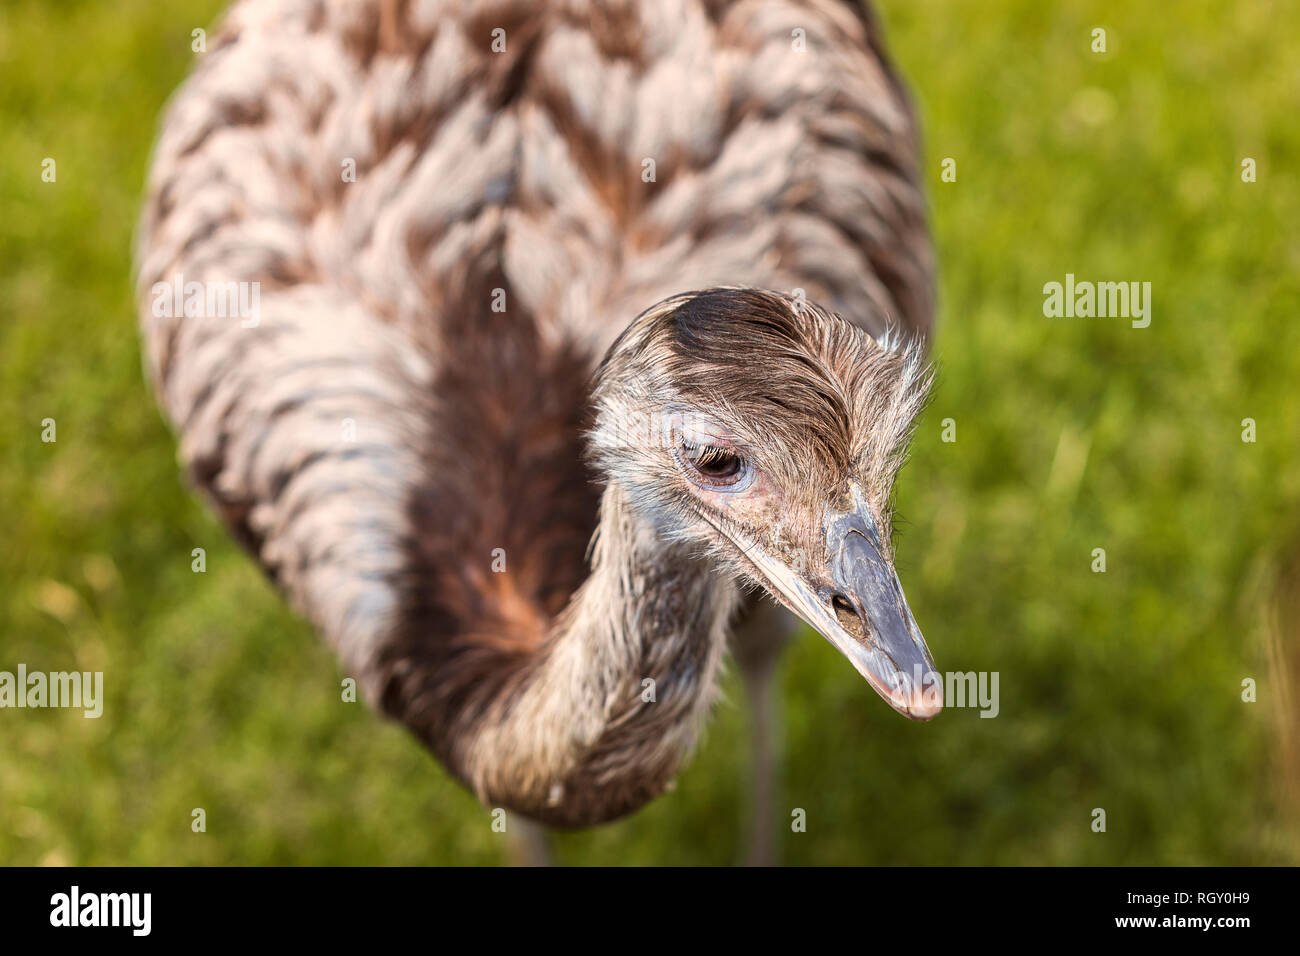 Close-up portrait of an Rhea Bird on a green background at the Zoo Stock Photo